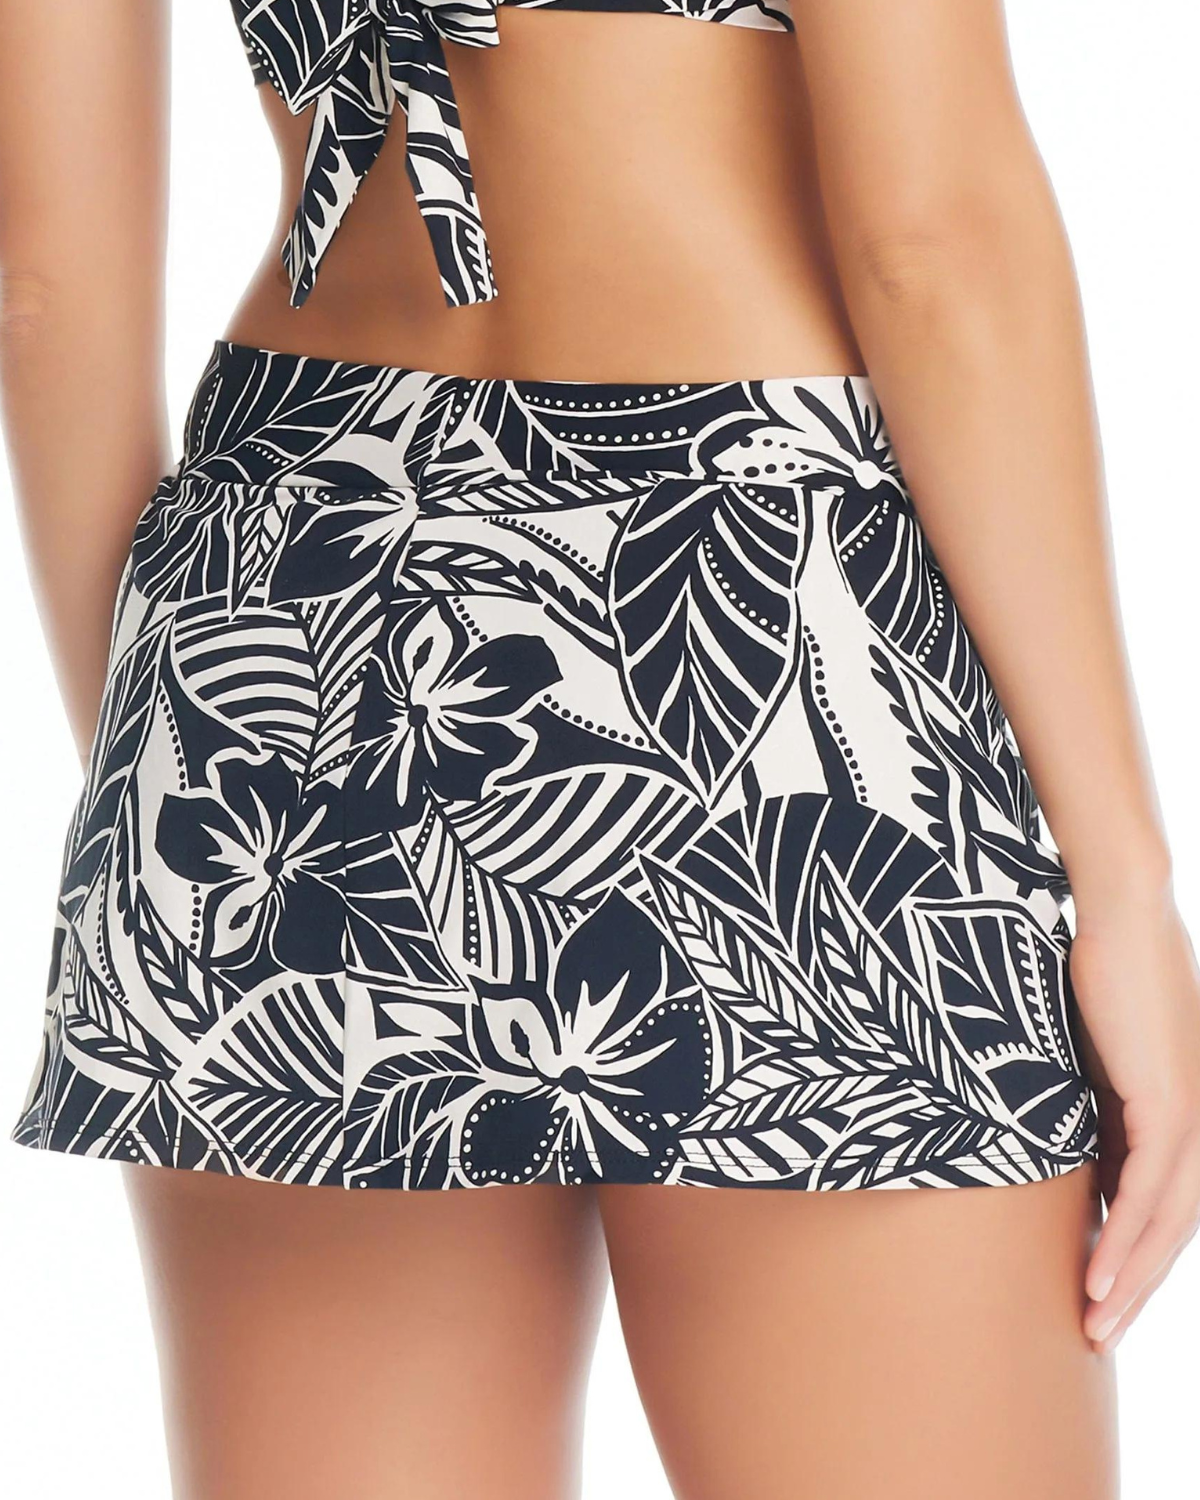 Model wearing a draped swim skirt in a black and white Hawaiian floral print.